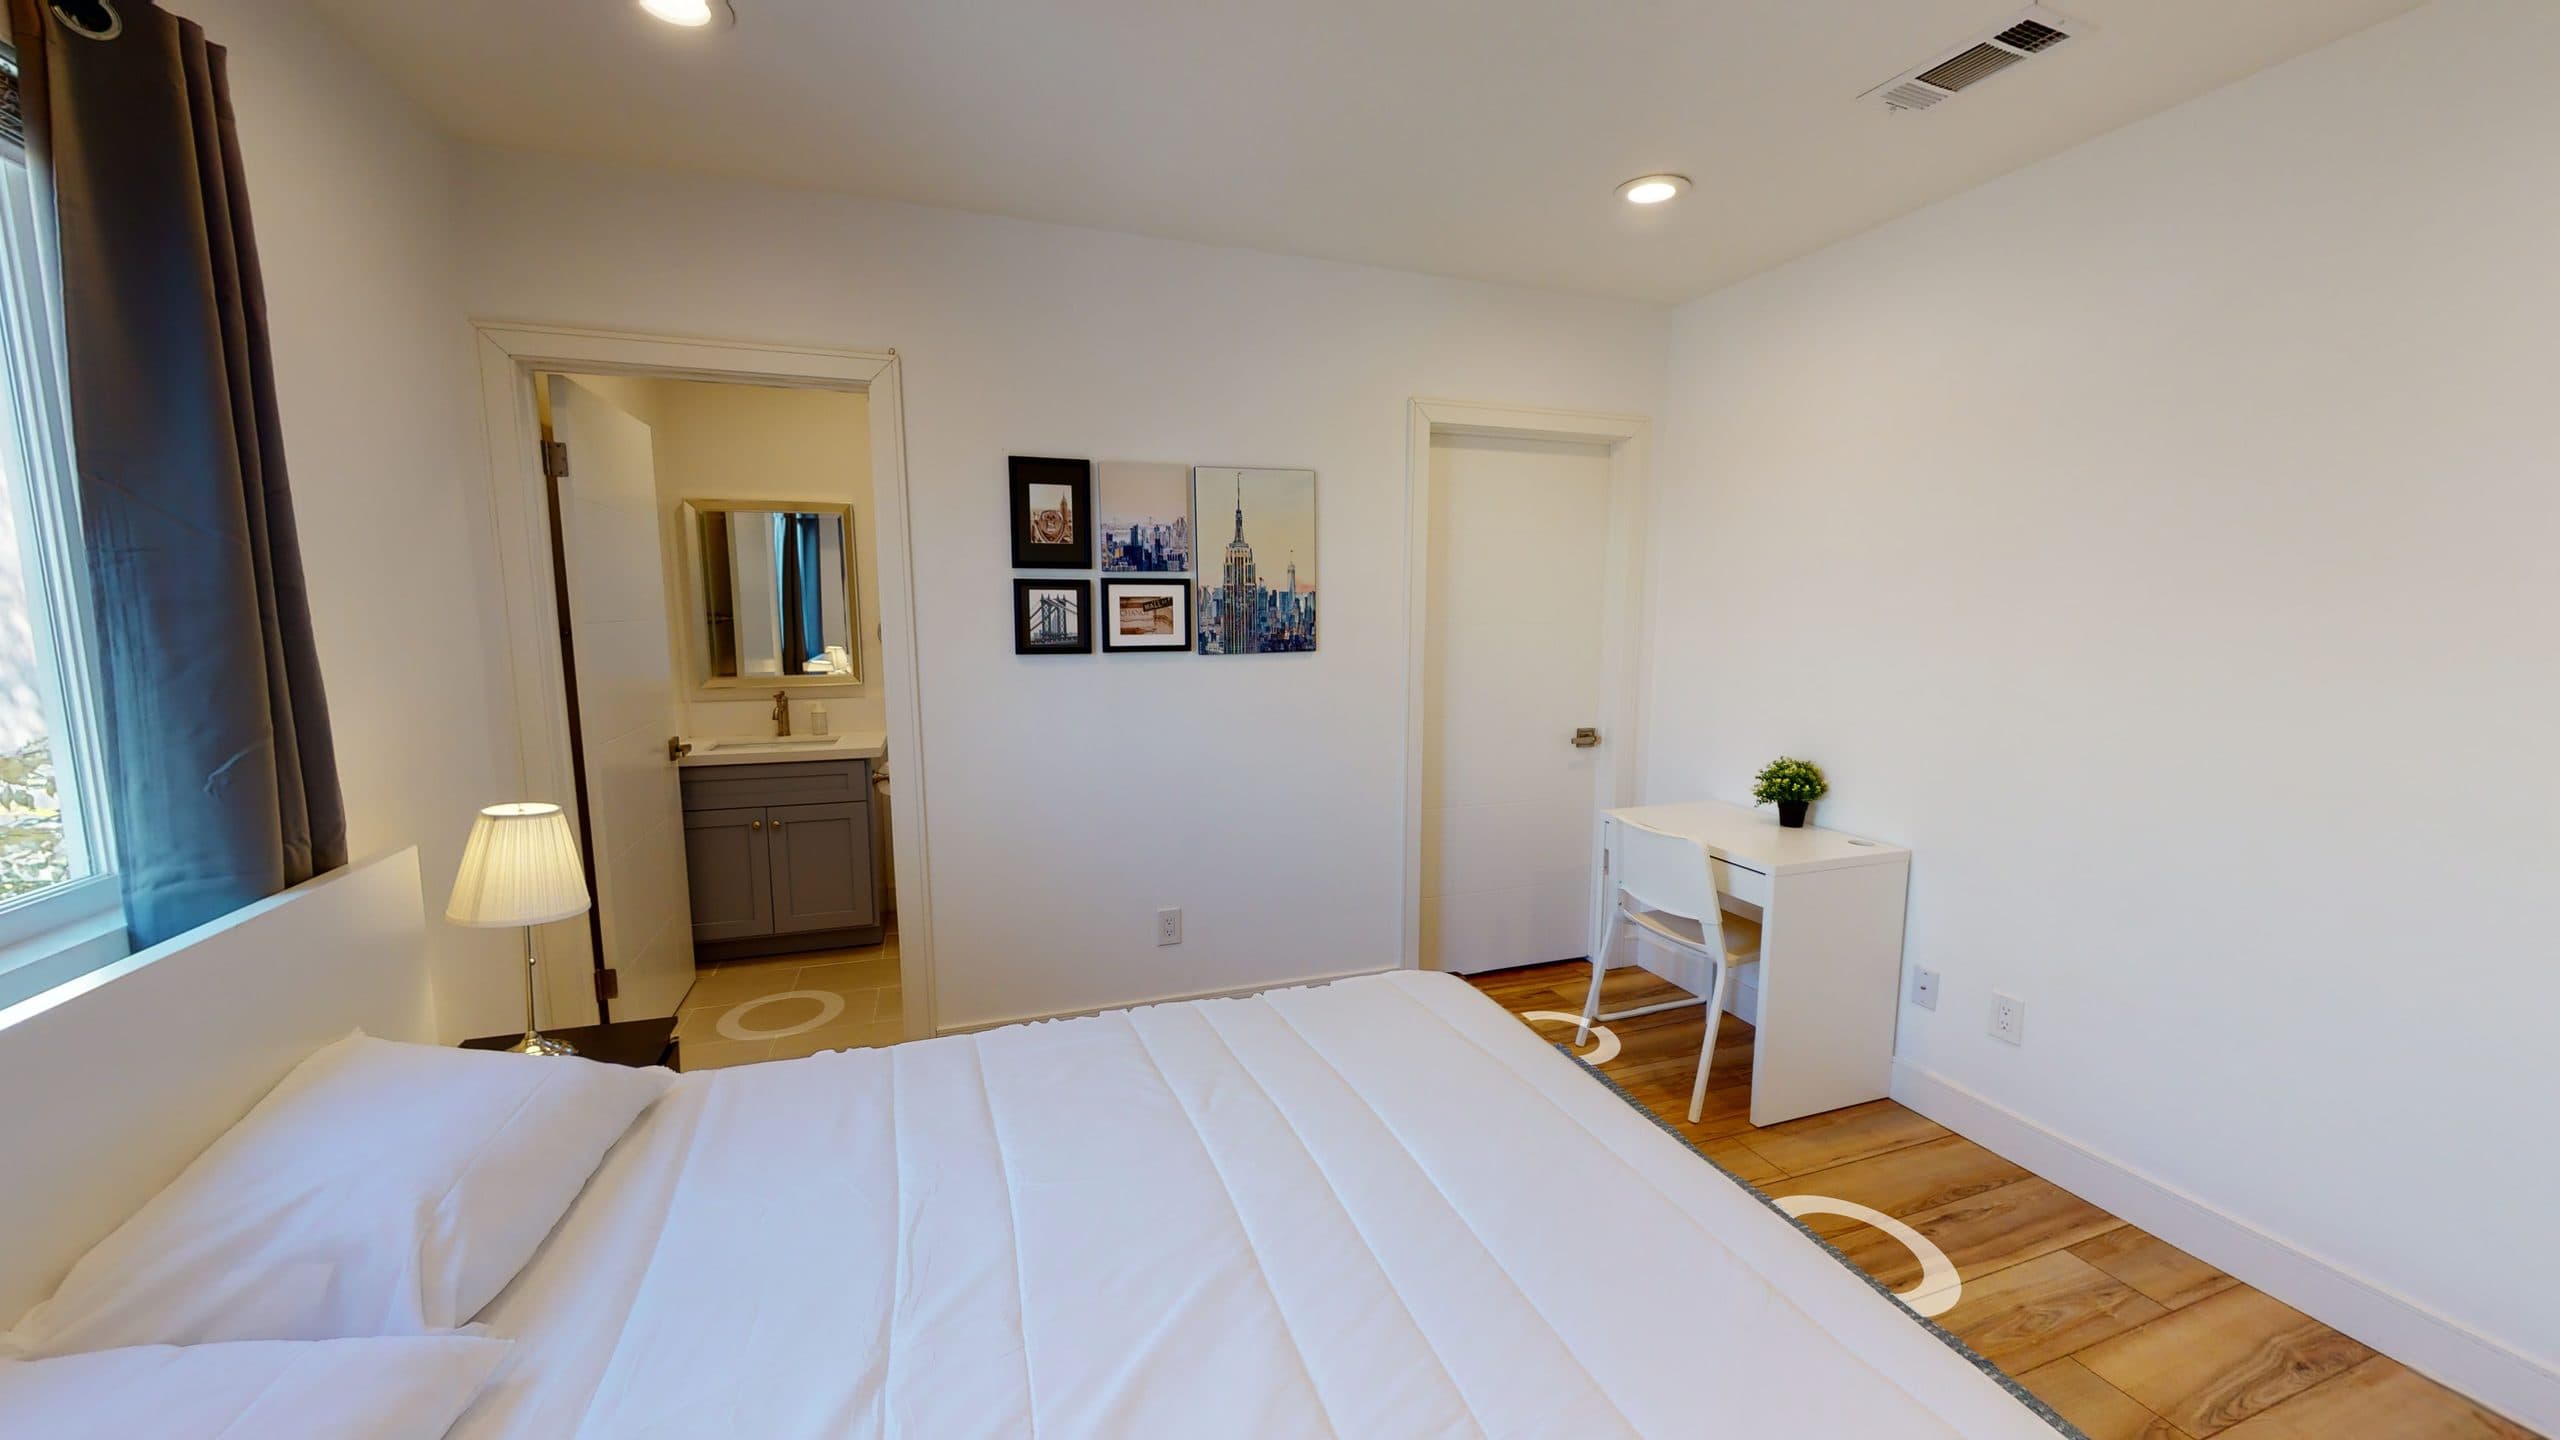 Photo 34 of #2373: Queen Bedroom 3B W/Private Bathroom at June Homes